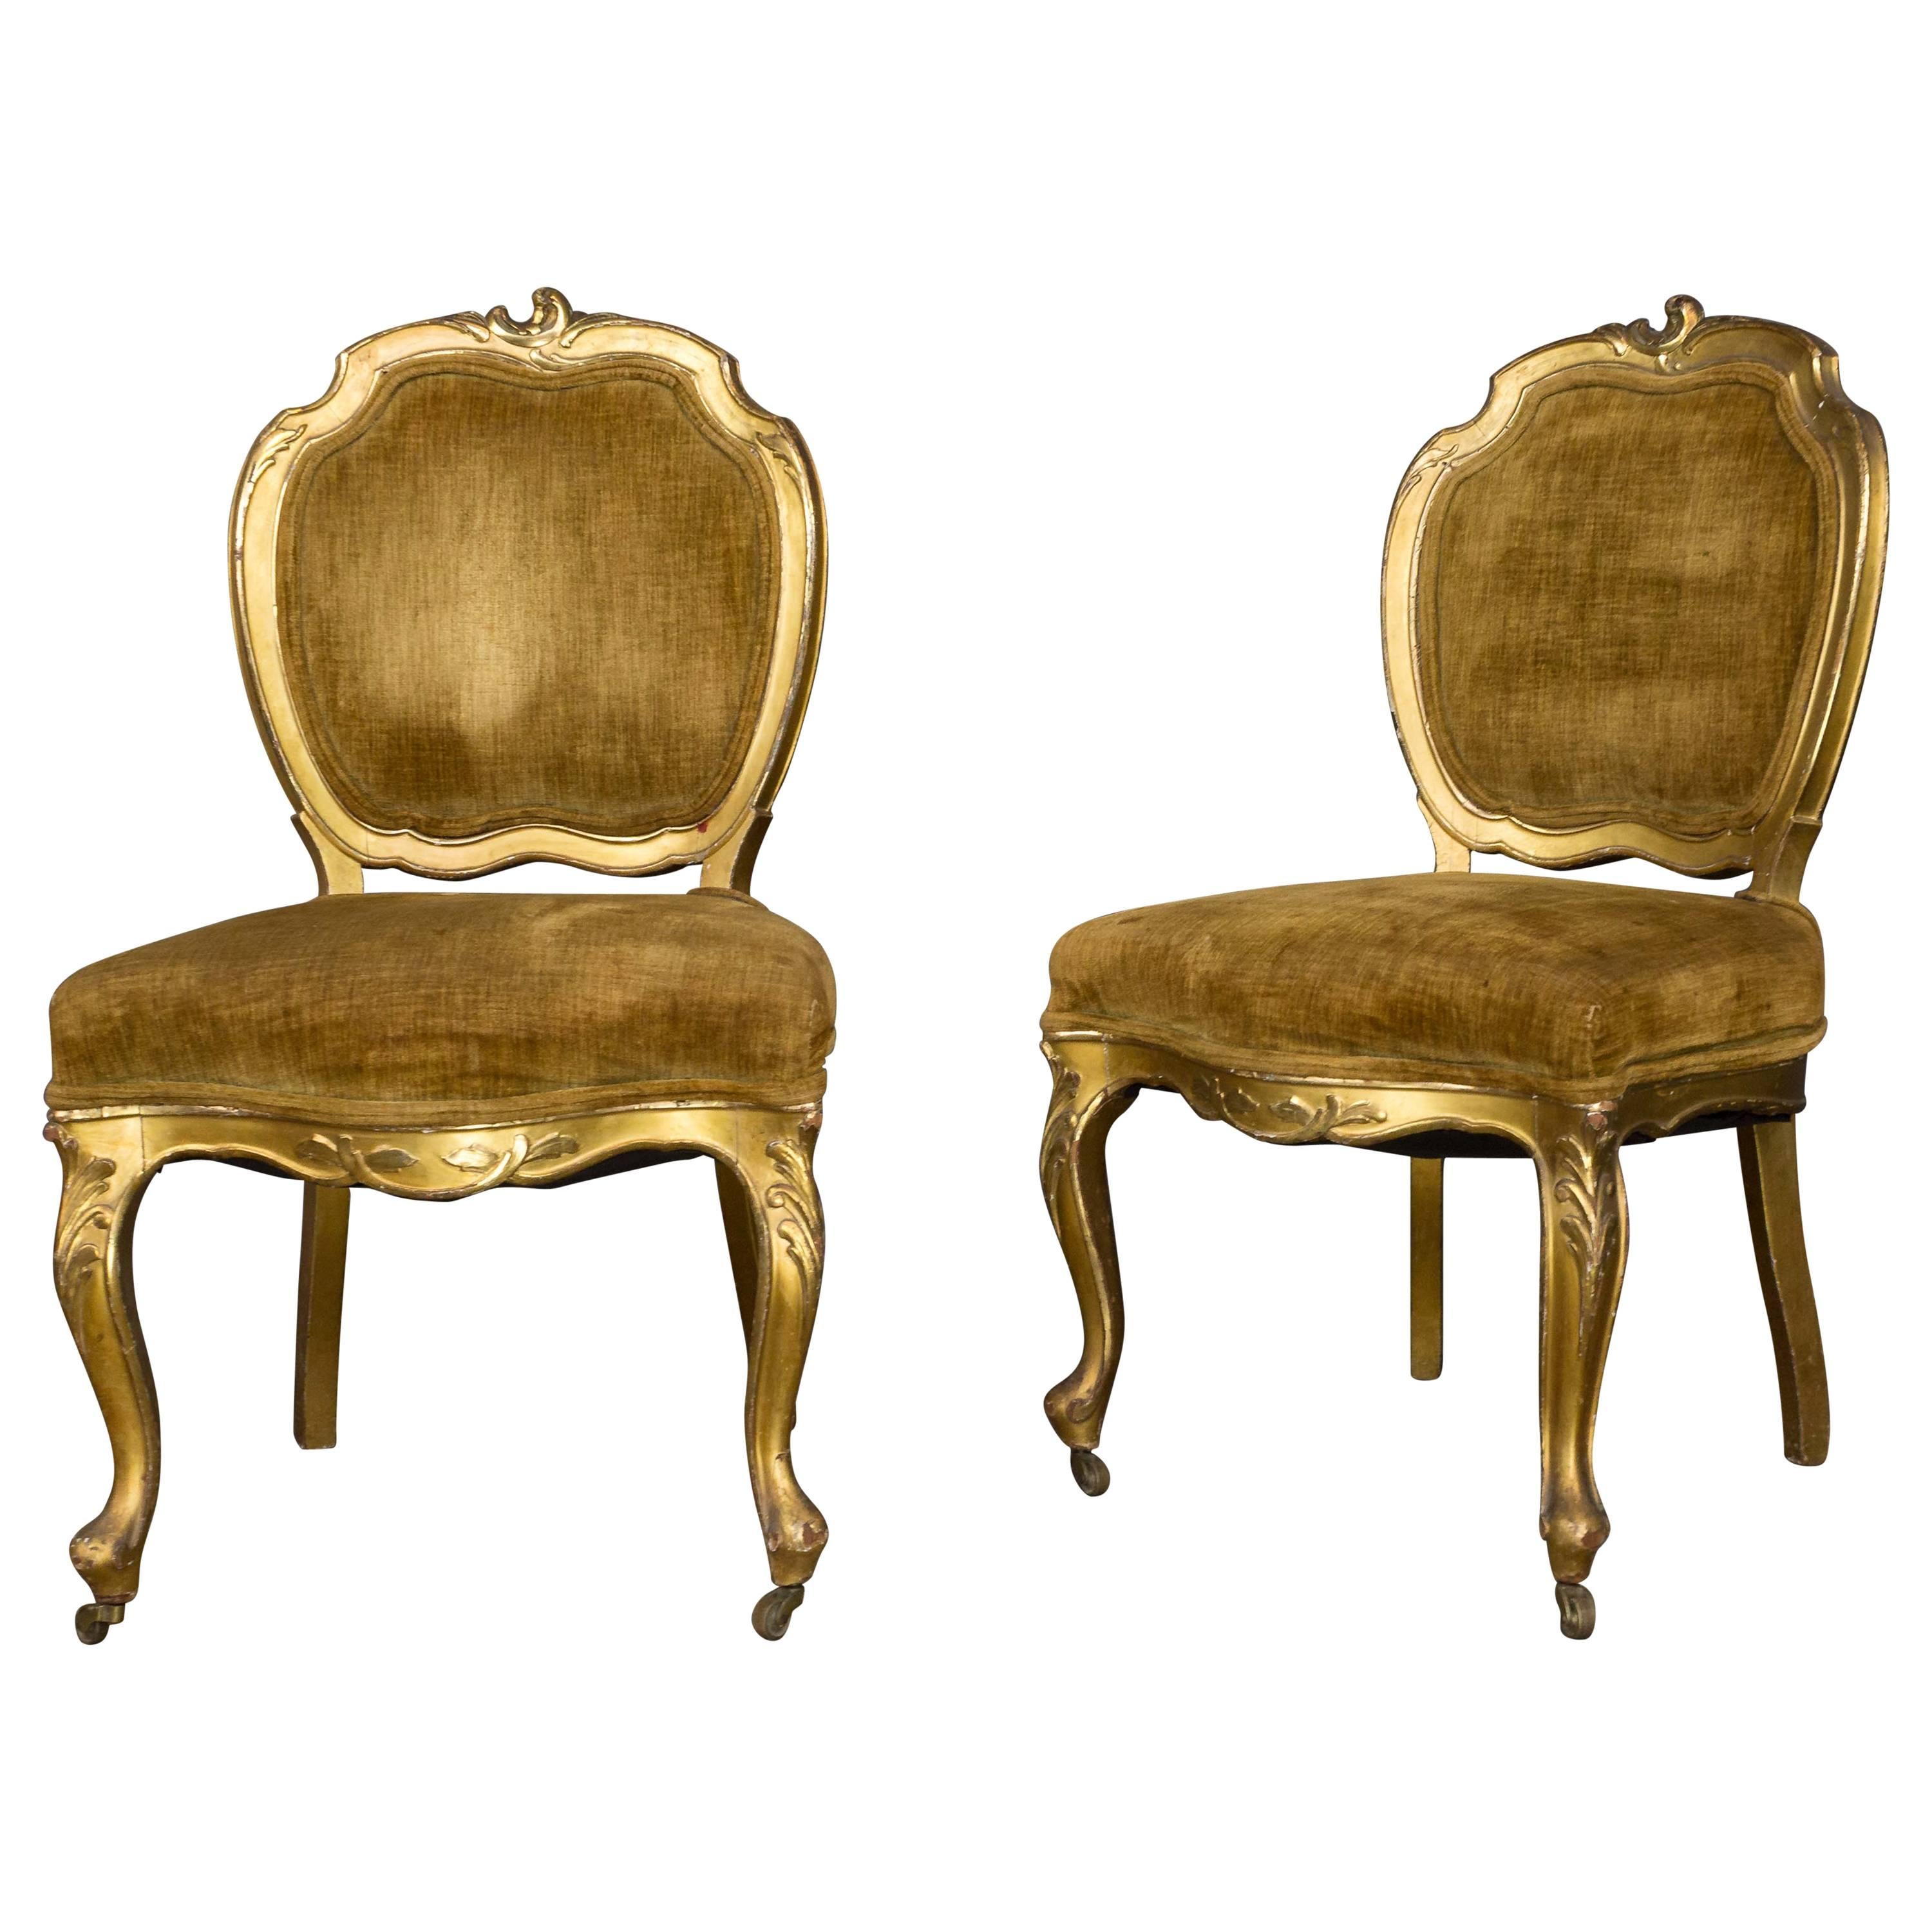 Pair of Rococo Revival Giltwood Side Chairs